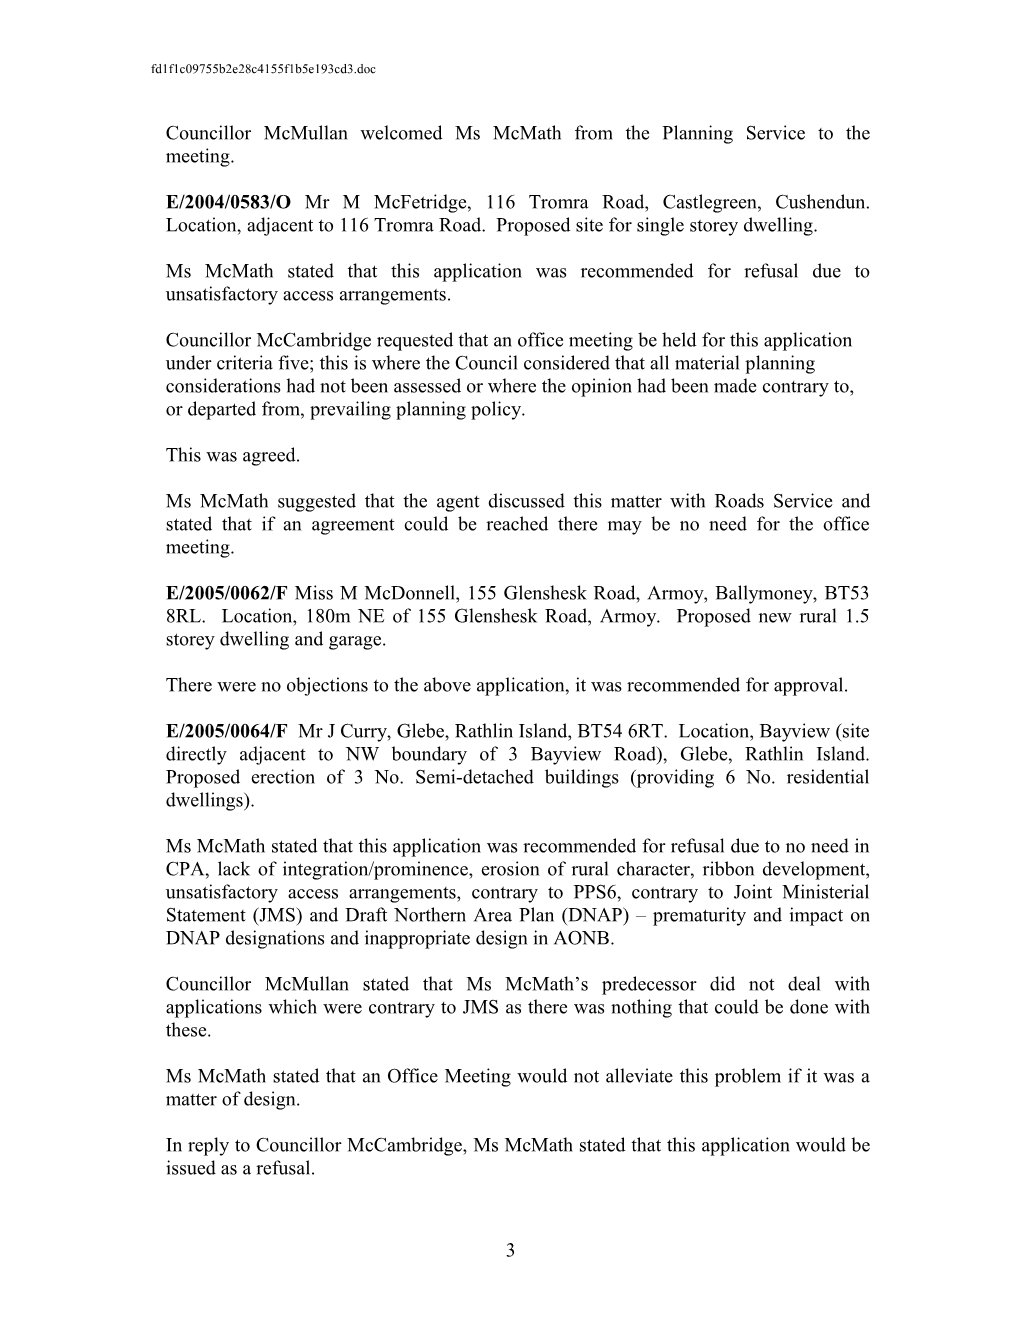 Minutes of the Proceedings of the Council Meeting Held s1